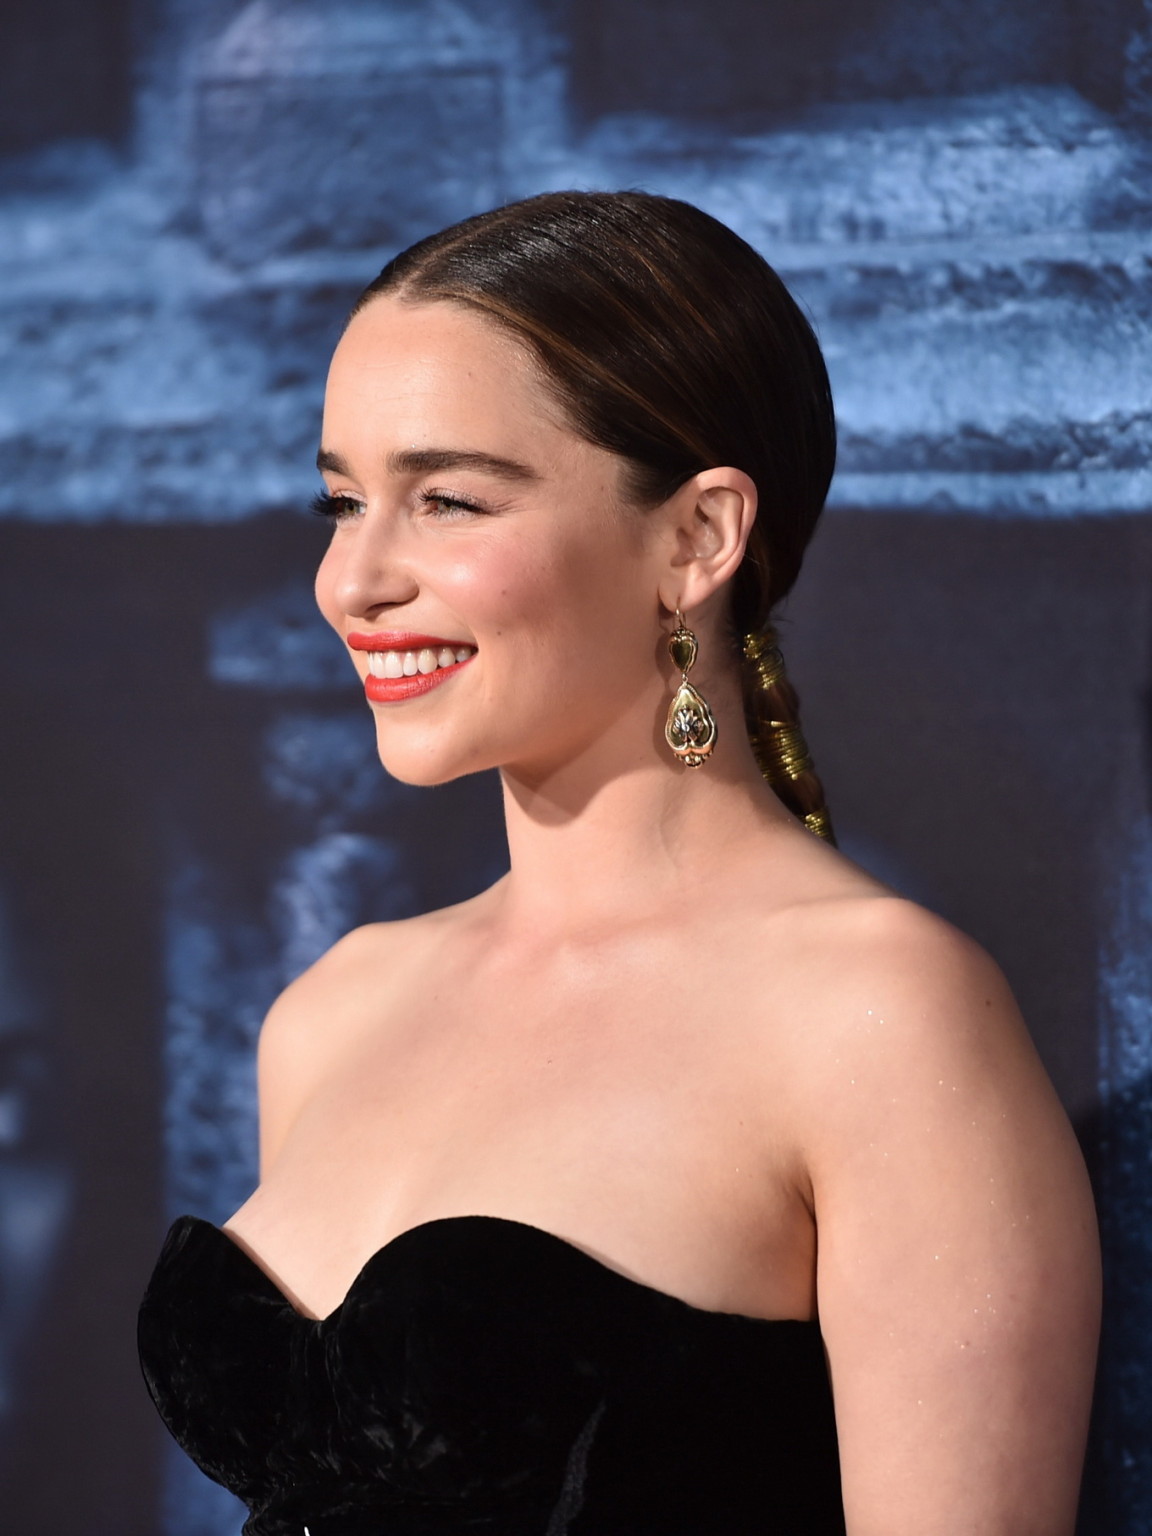 Emilia Clarke shows off her big boobs in a strapless dress #75143795